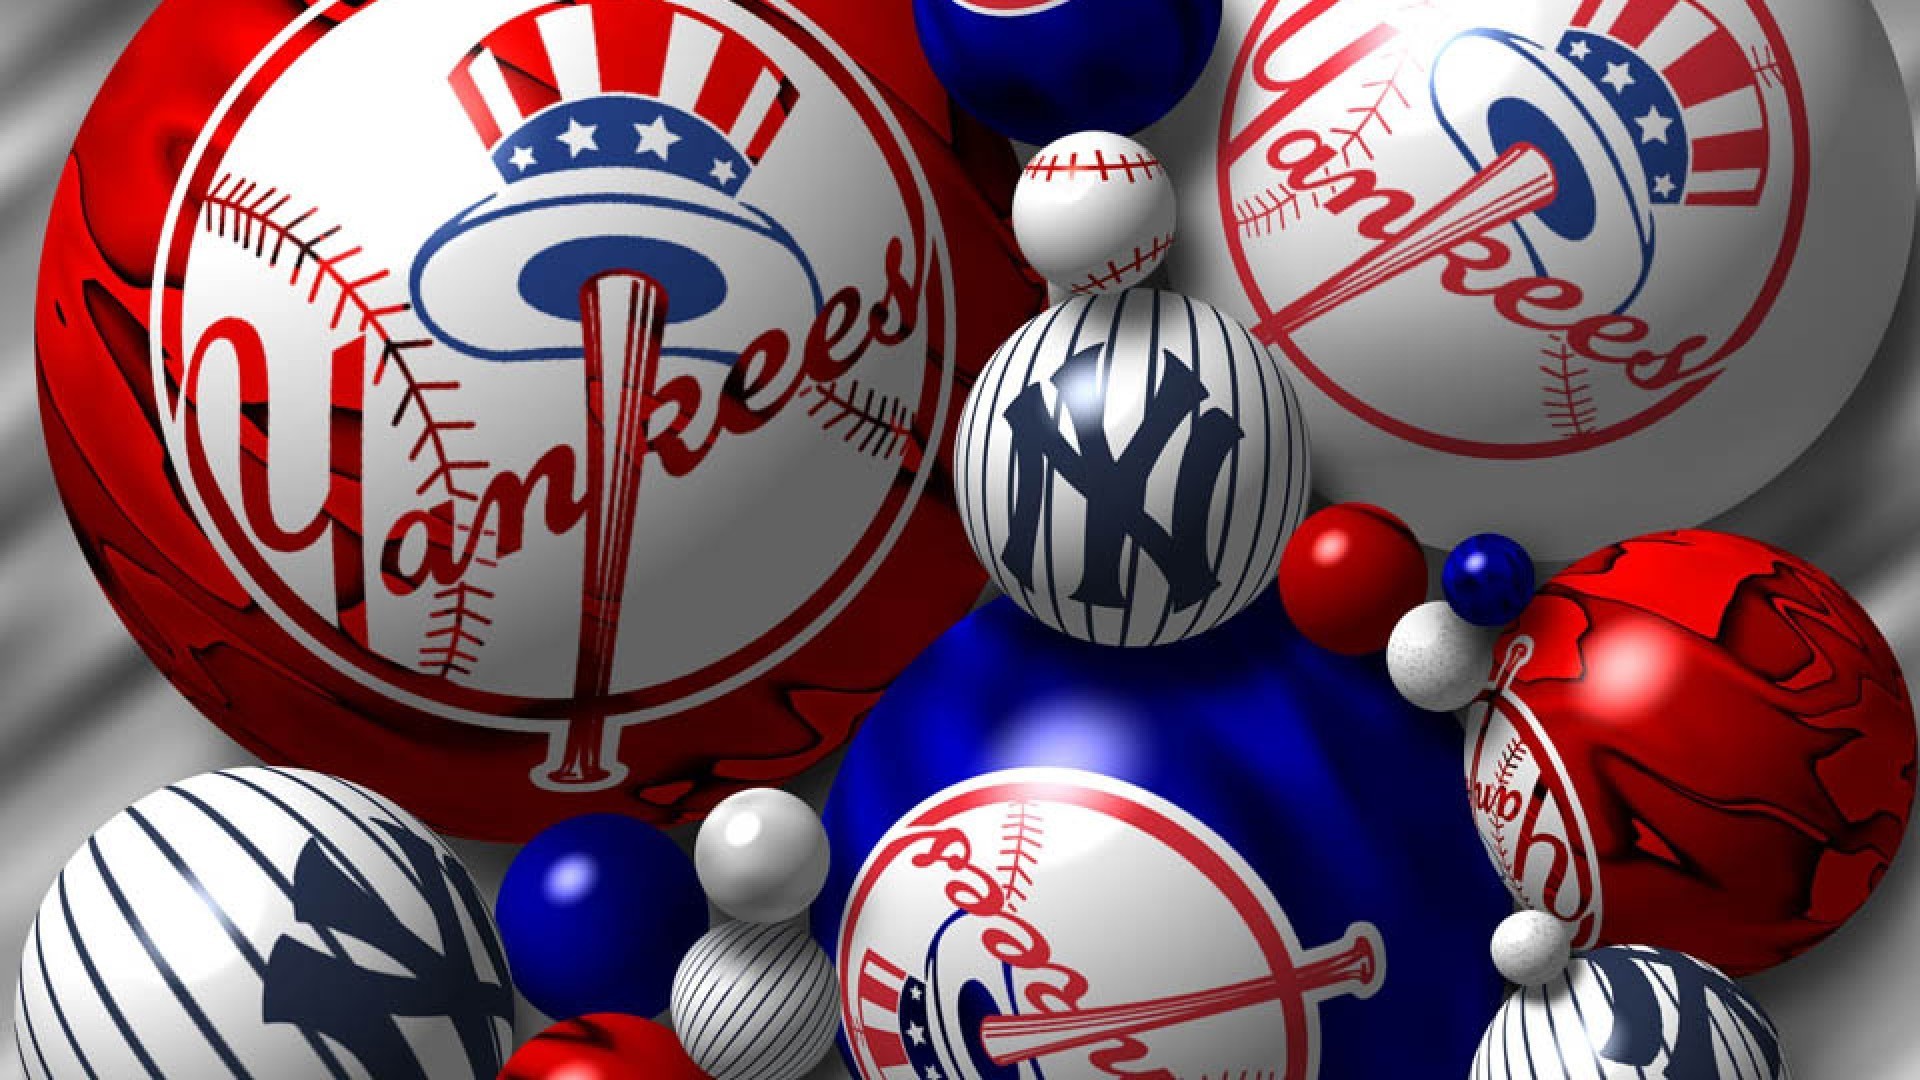 yankees wallpaper hd,ball,soccer ball,competition event,super bowl,games